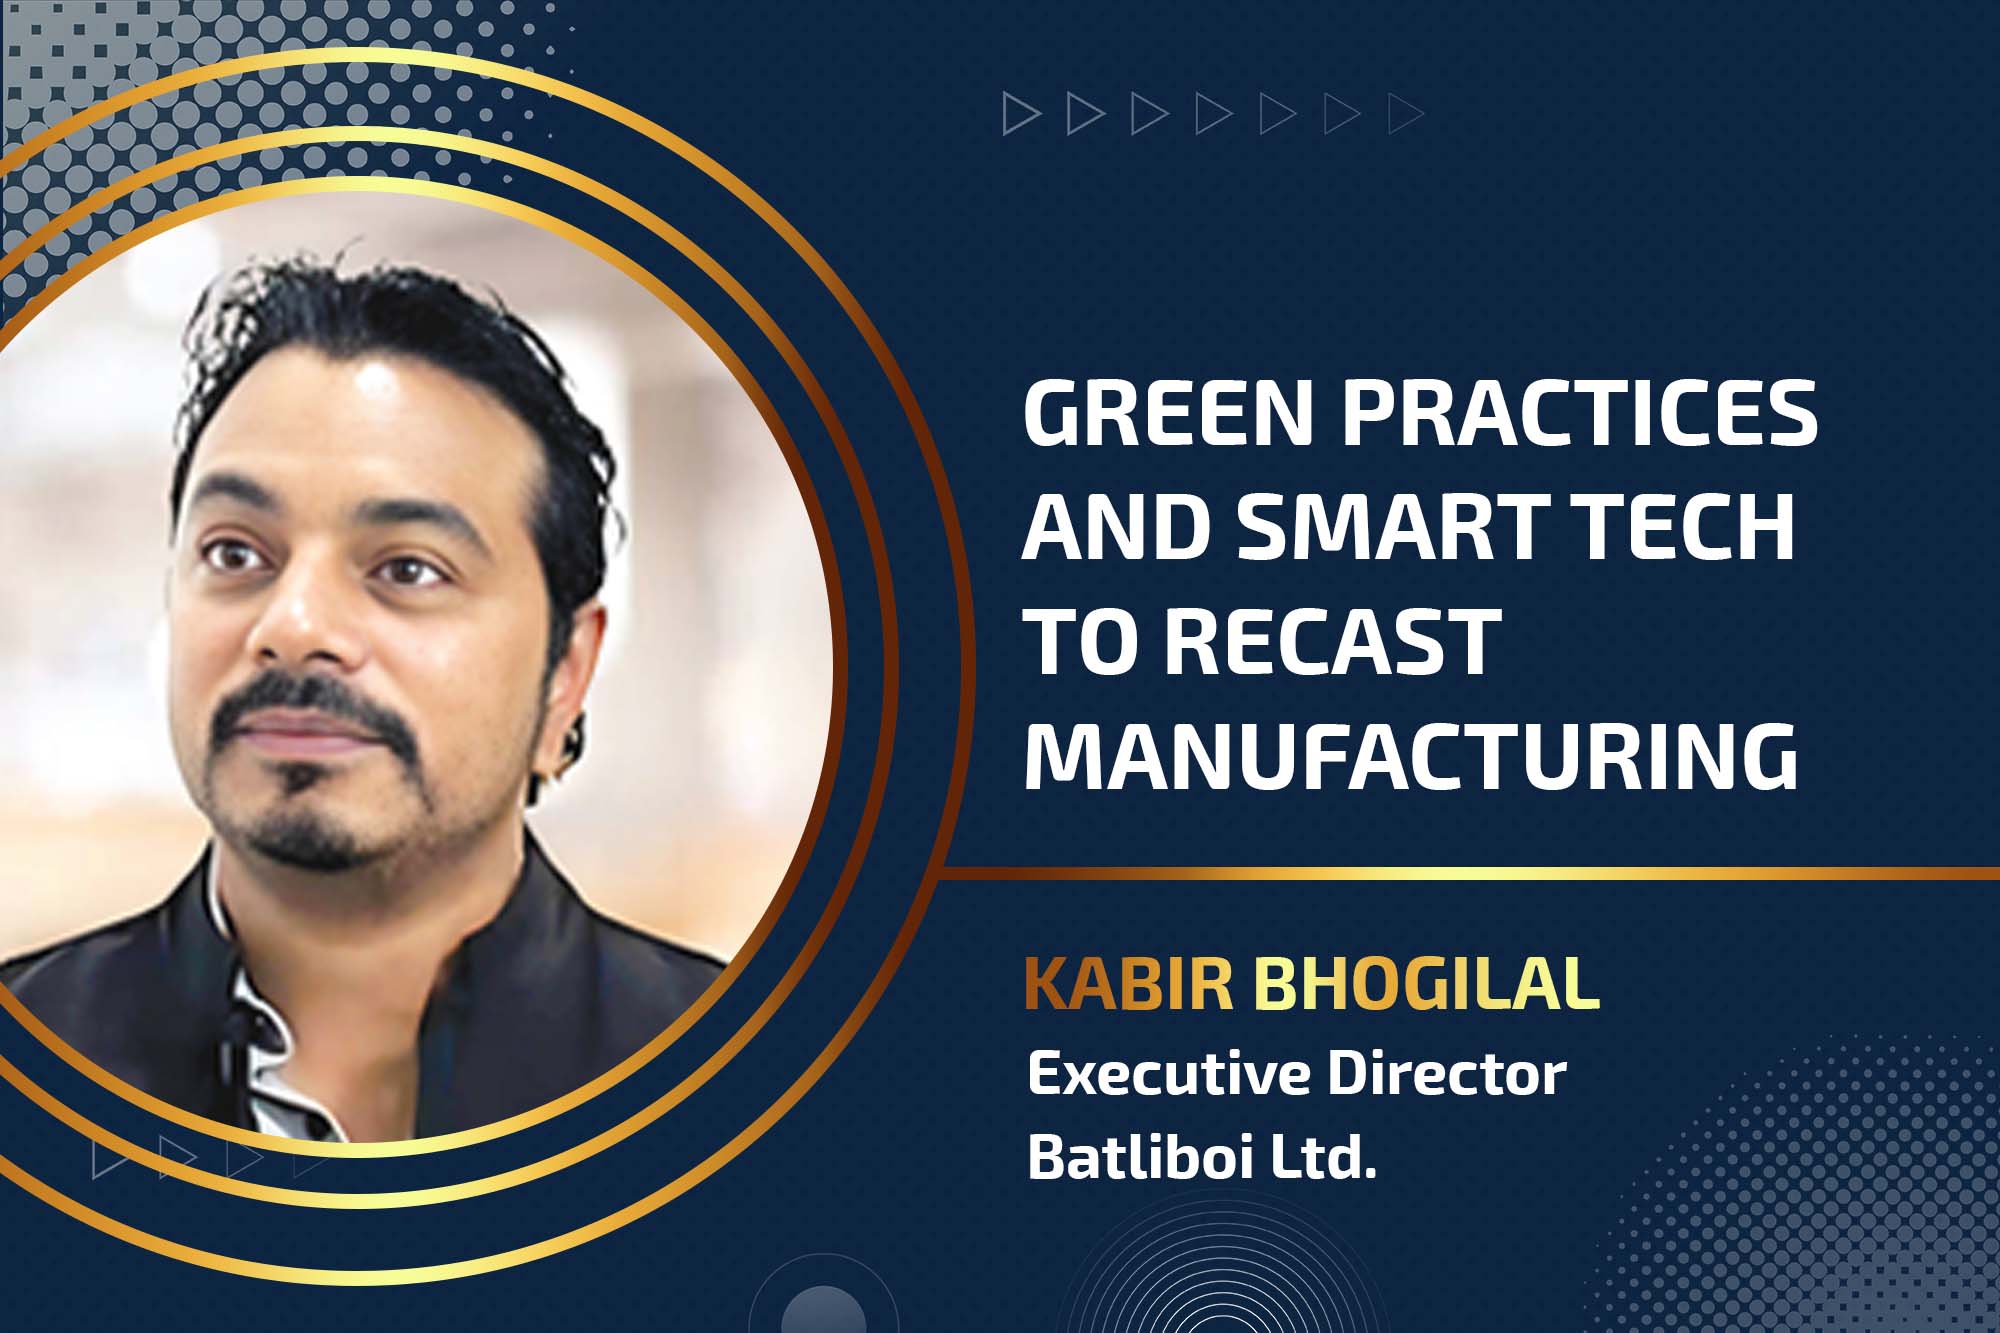 Green practices and smart tech to recast manufacturing